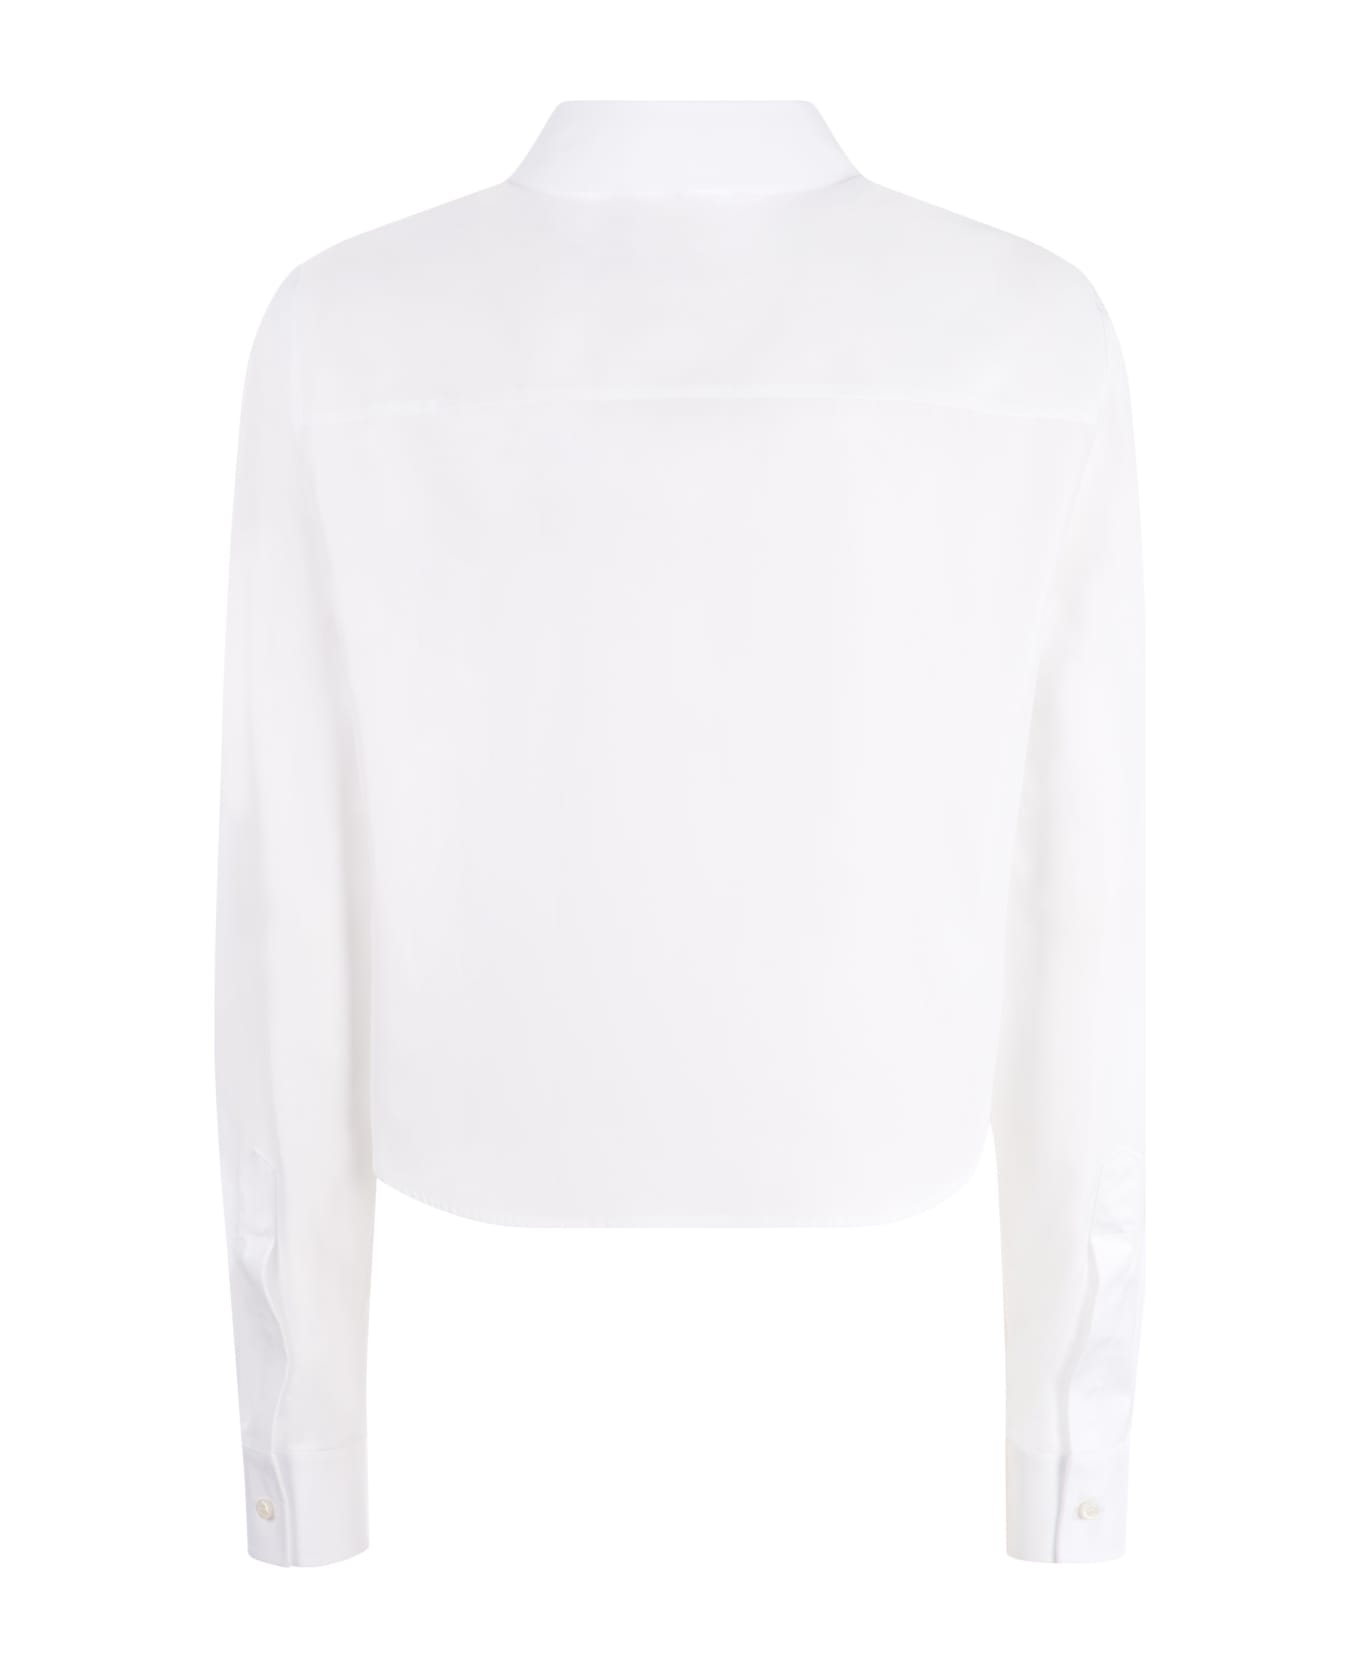 Dsquared2 Shirt Dsquared2 'icon' In Cotton - Bianco